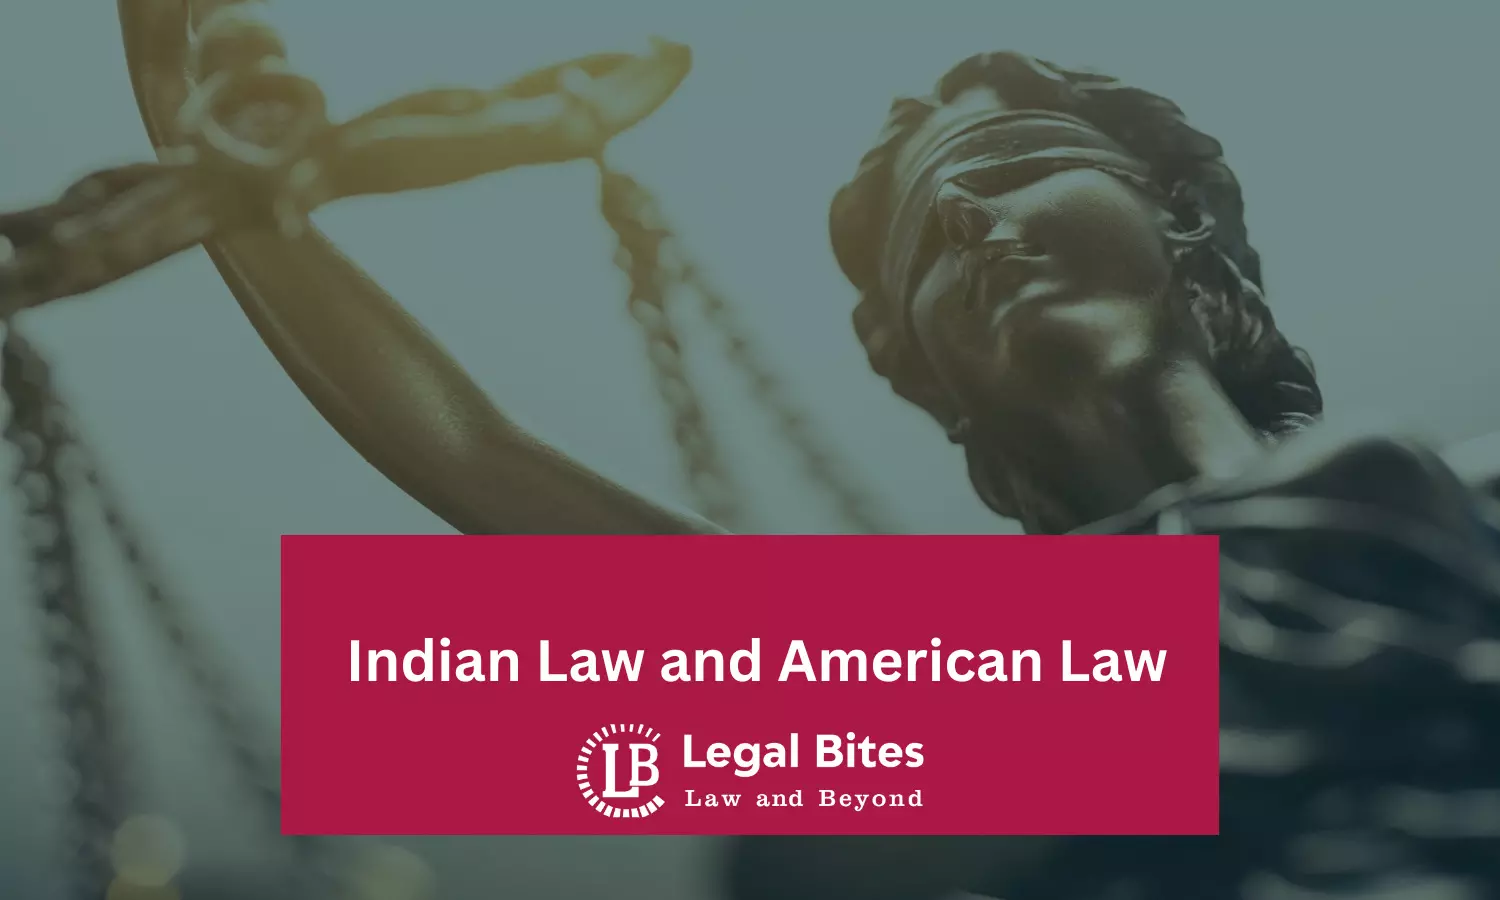 Difference between Indian Law and American Law